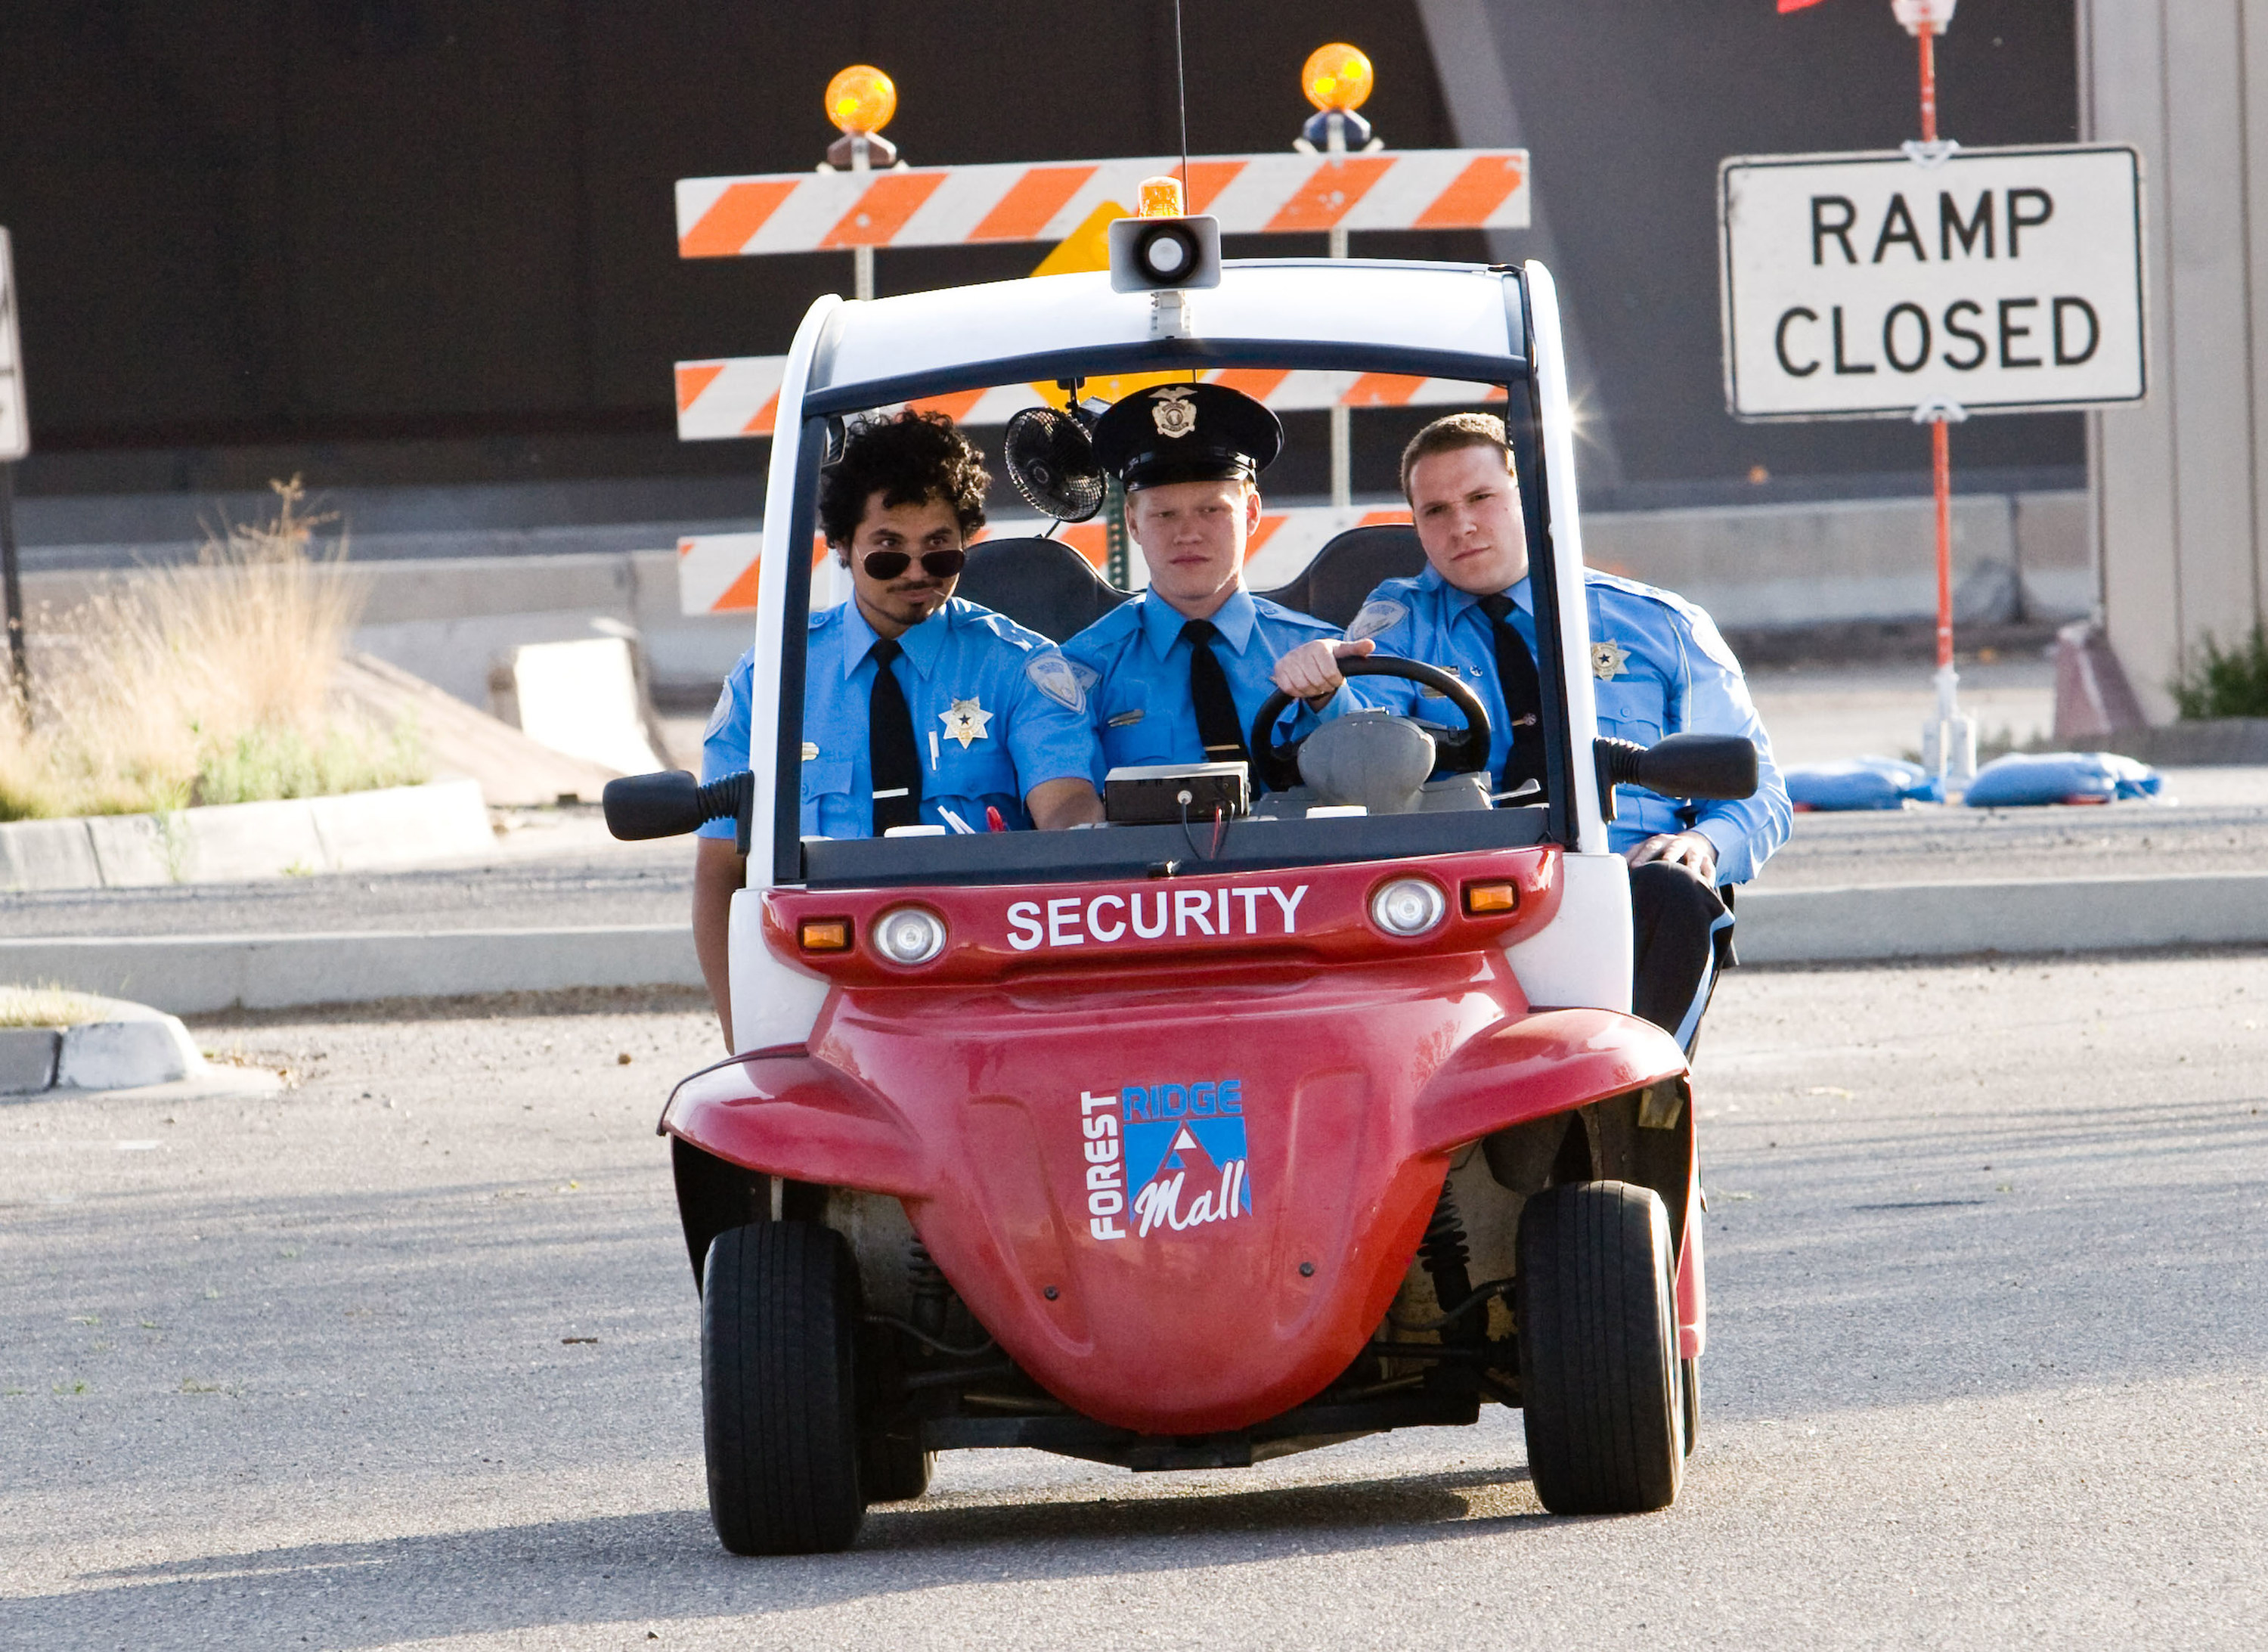 Michael Pena, Jesse Plemons, and Seth Rogen riding in a security cart.